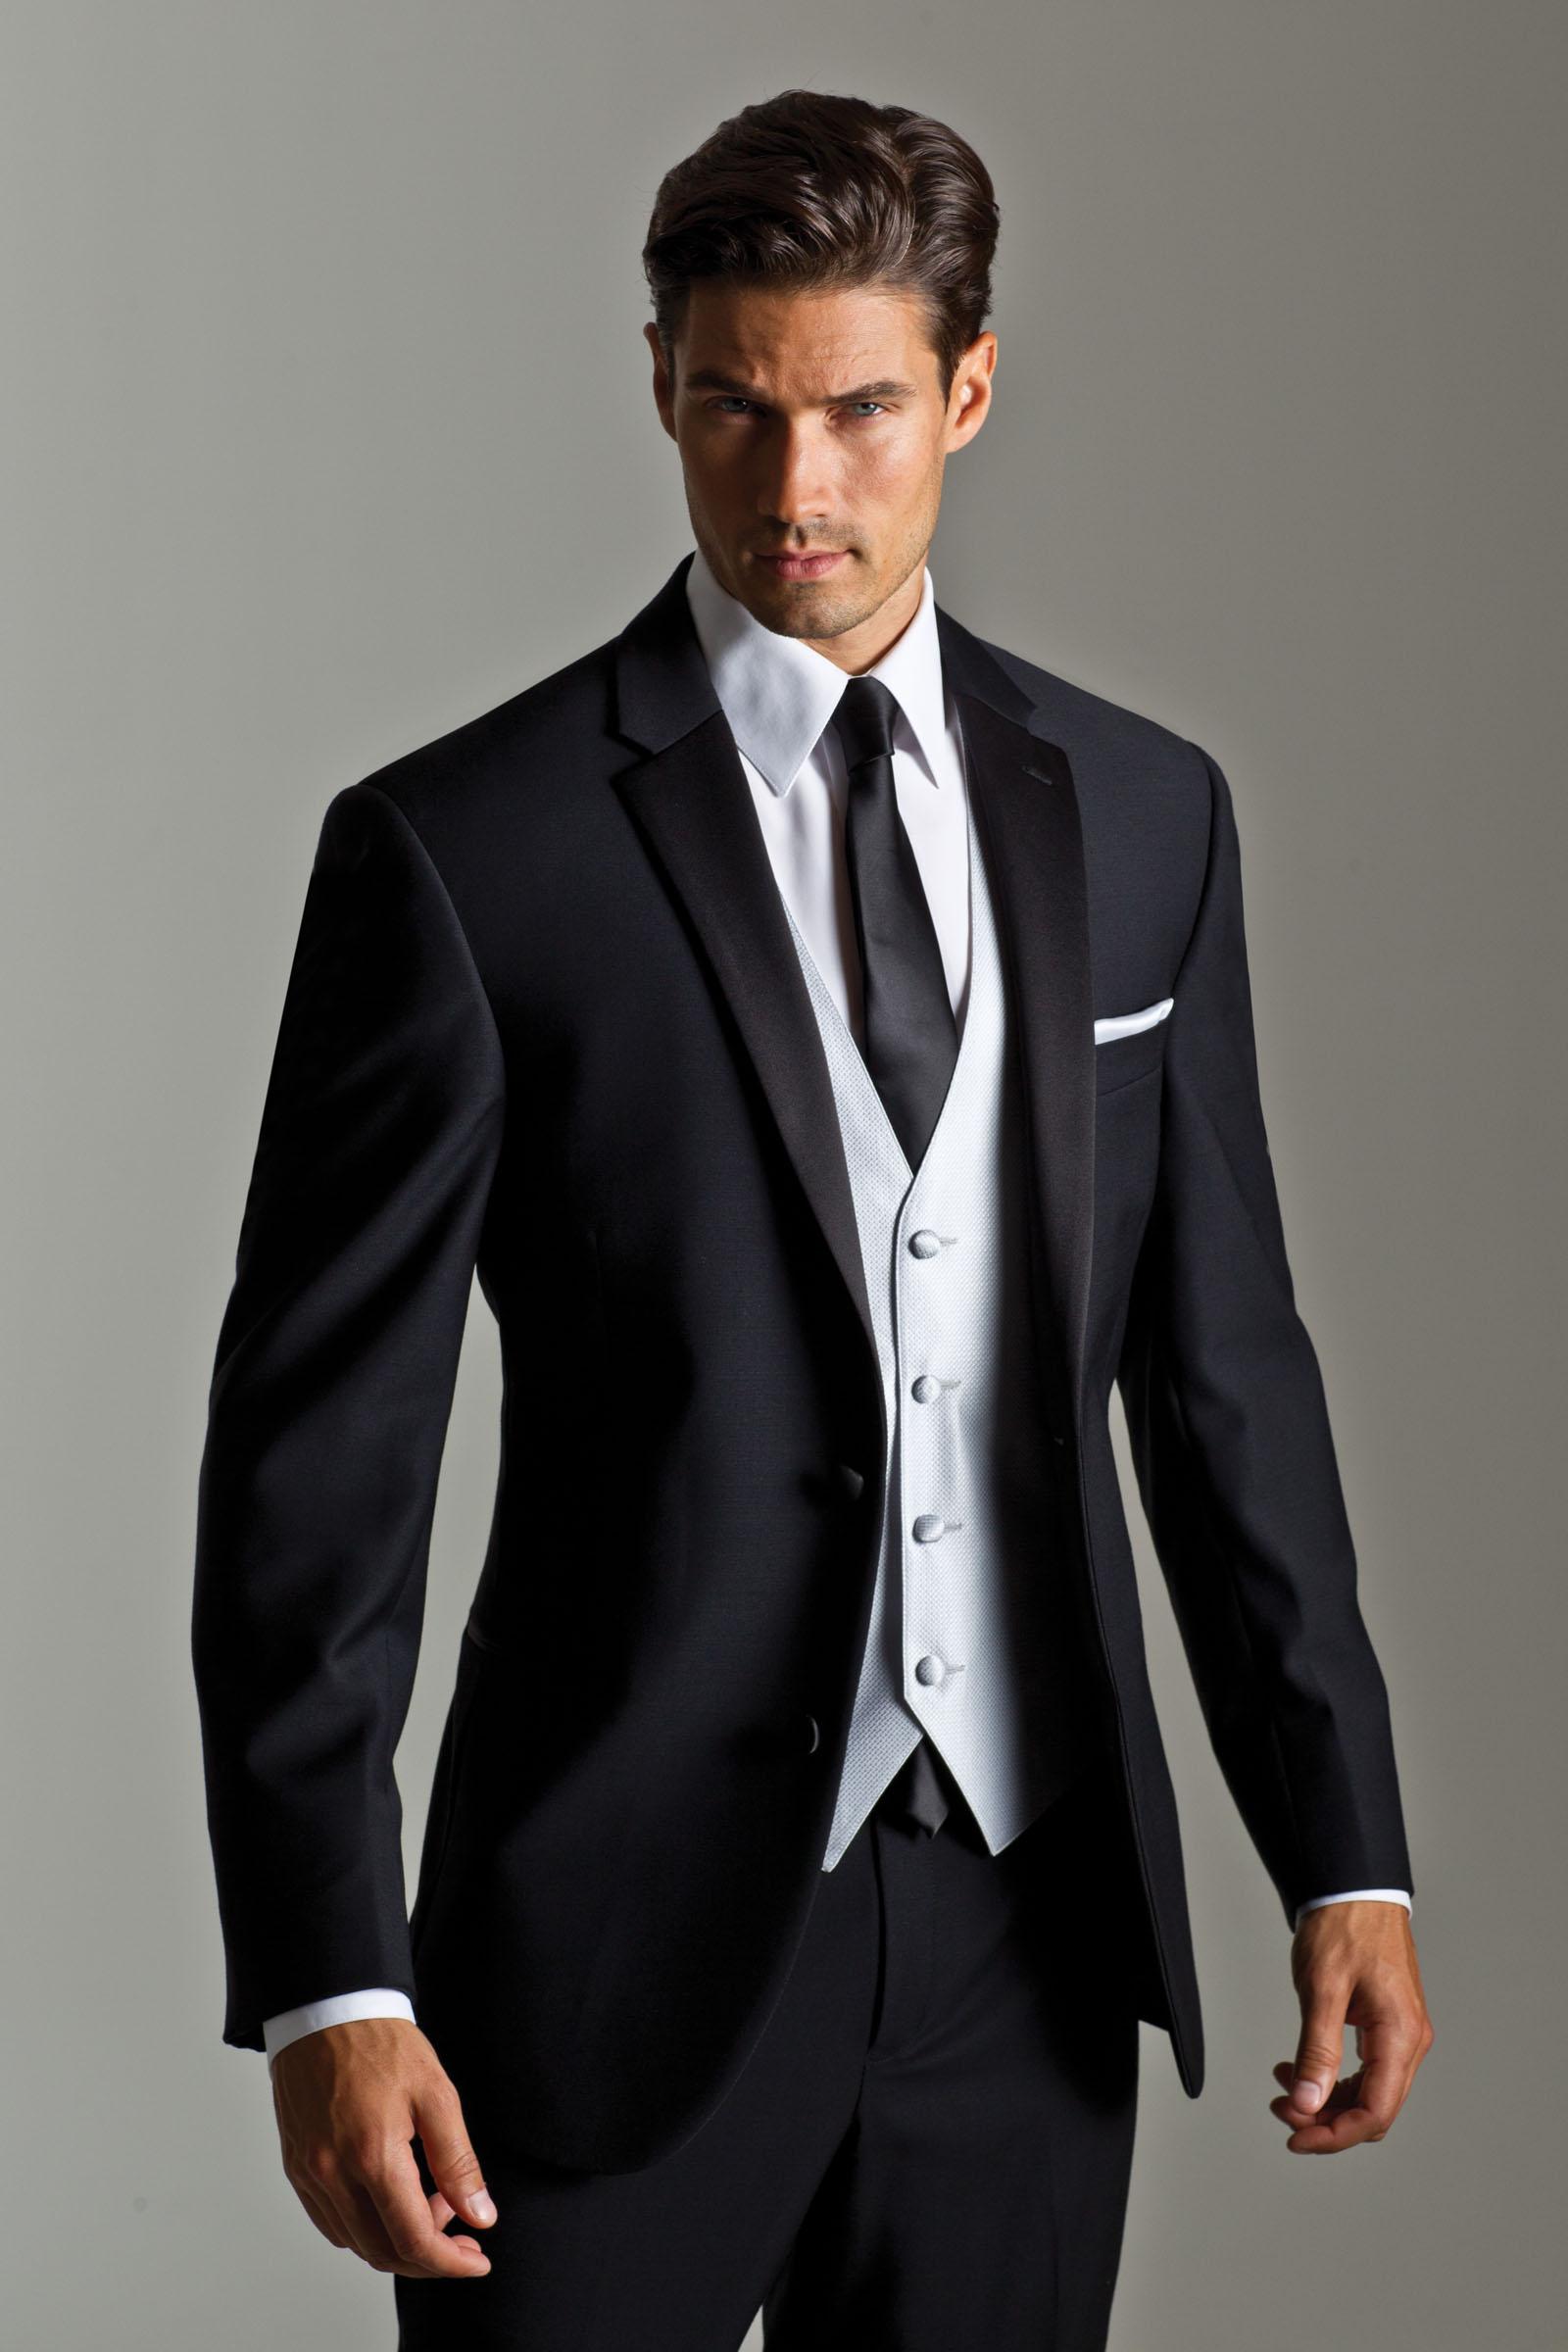 suits suit for men styles – some of the best